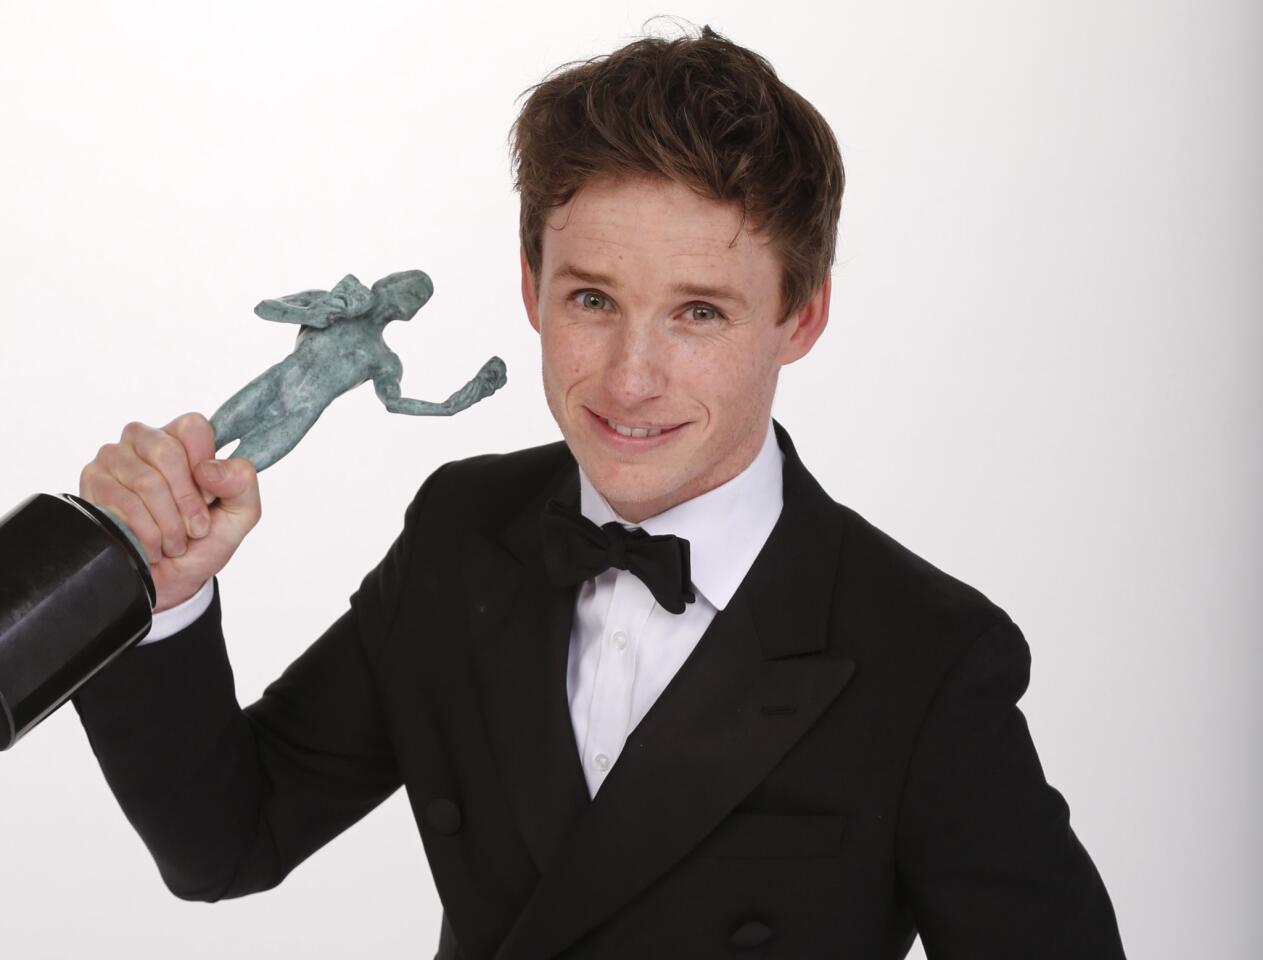 SAG Awards 2015 | L.A. Times photo booth